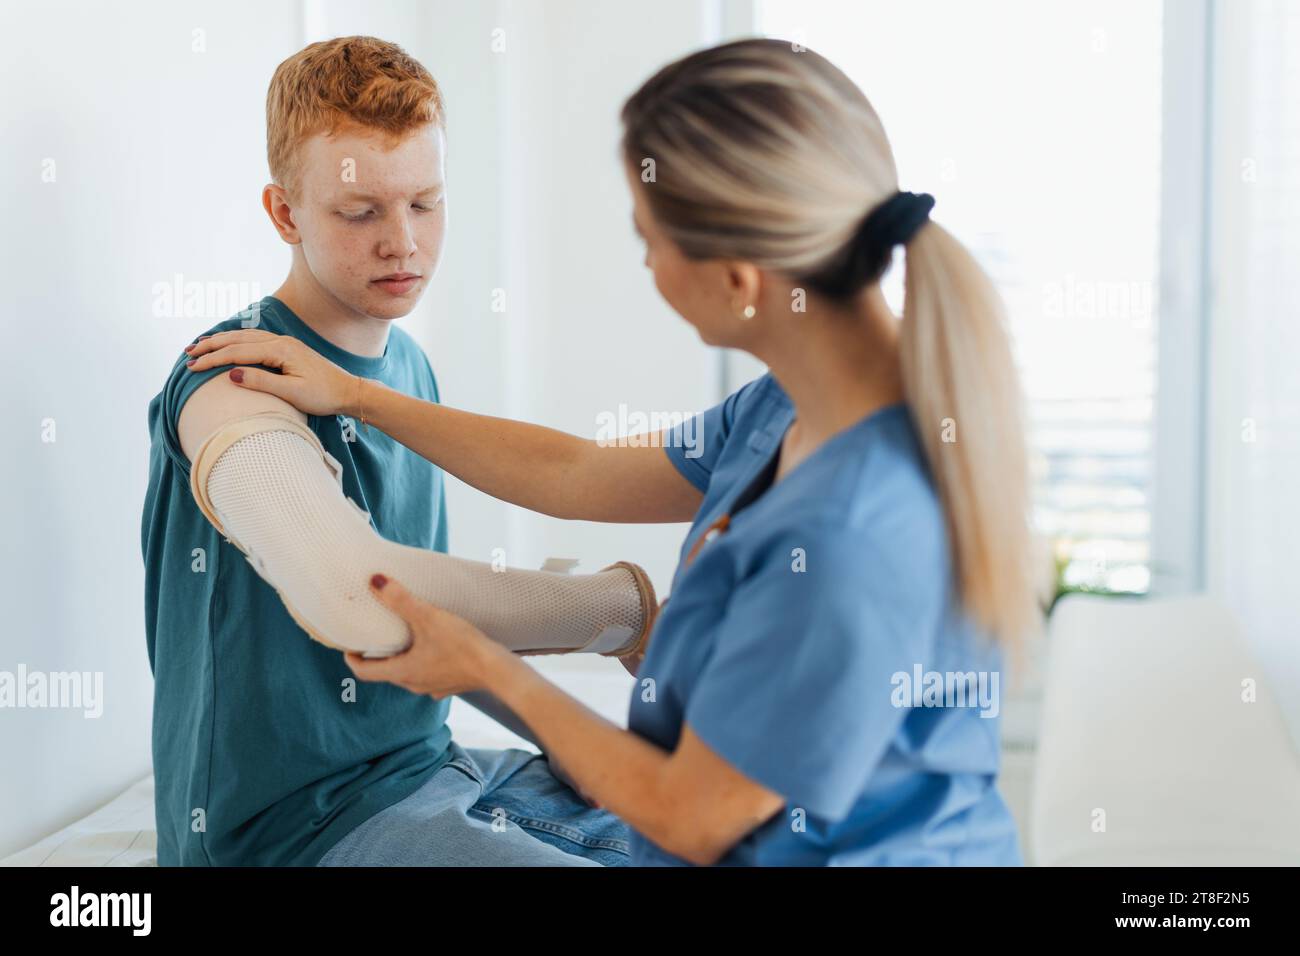 Doctor checking the orthopedic cast, brace on a teenage patient's broken arm. Teenage boy is healing a fracture after an accident. Stock Photo